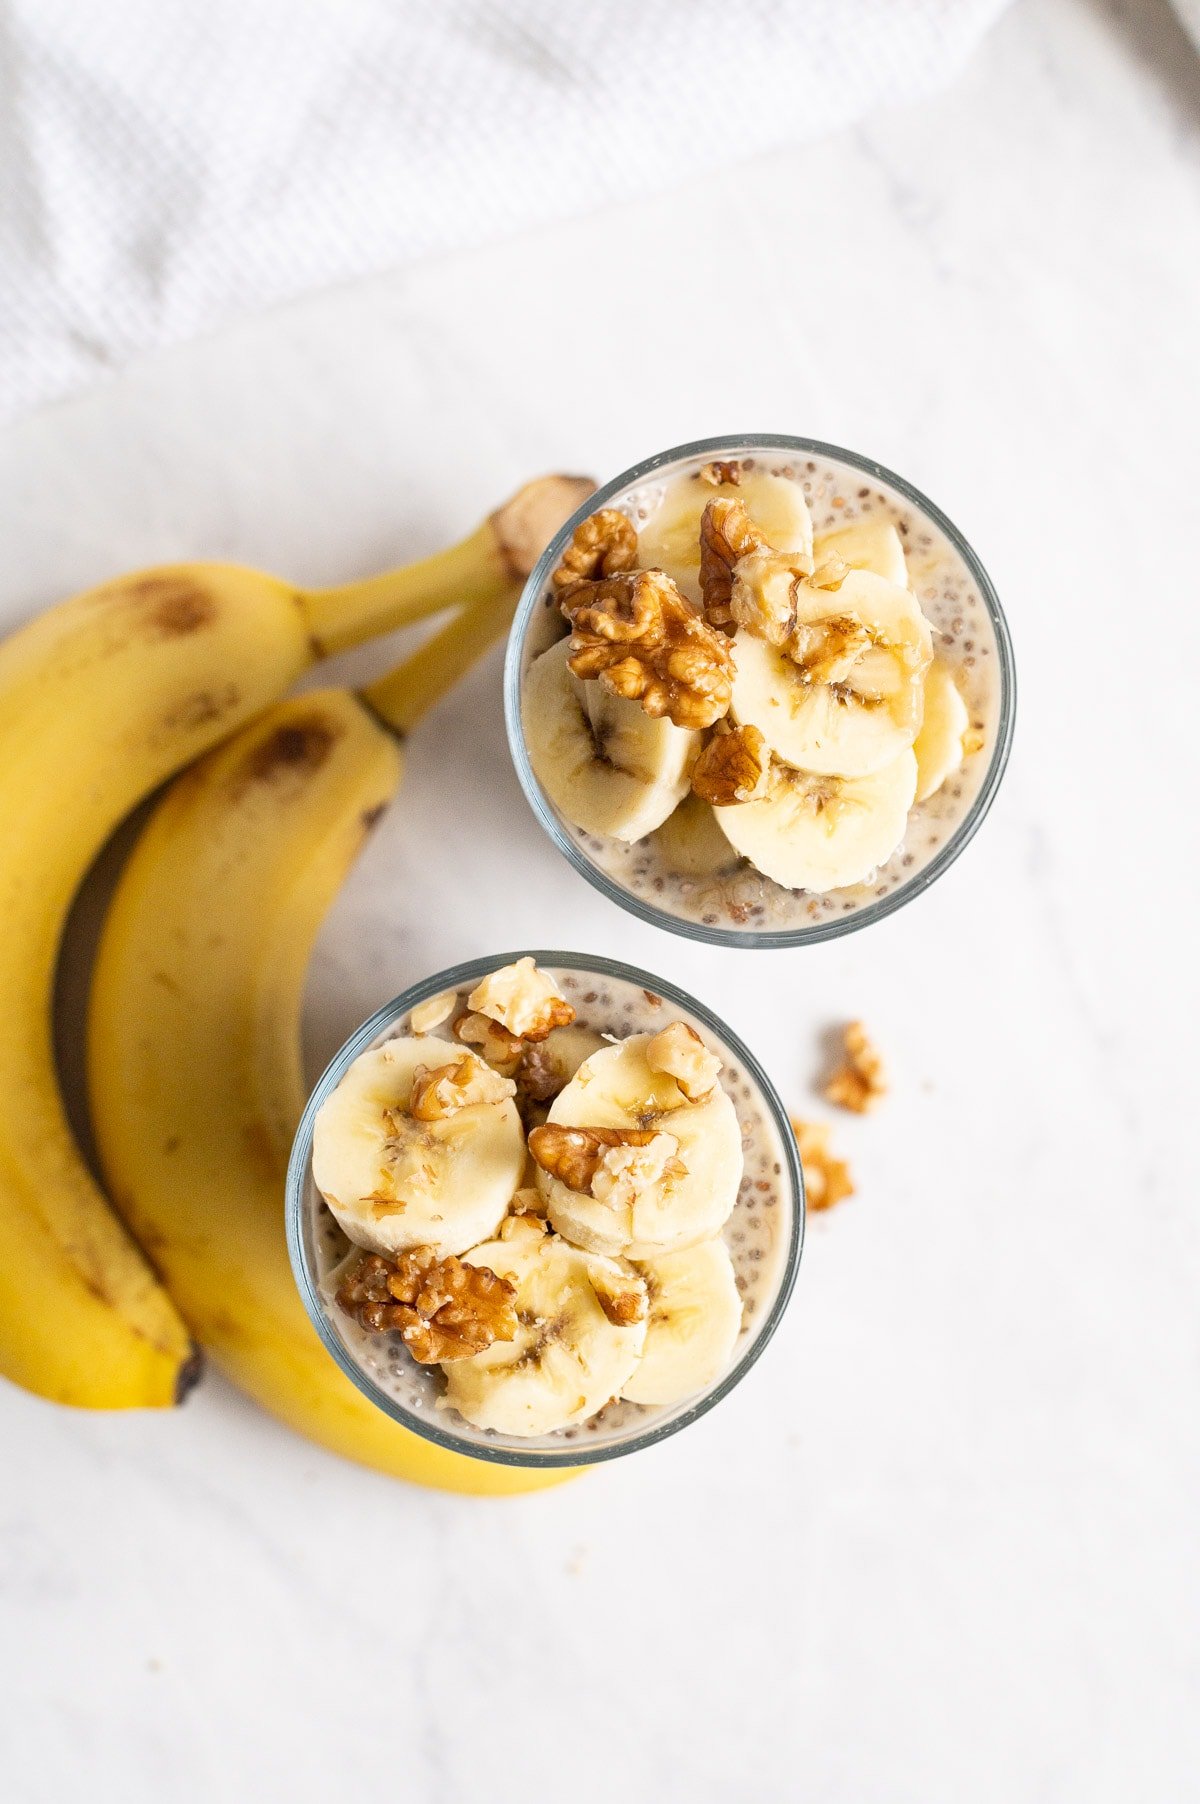 Two glasses with banana chia pudding topped with sliced bananas, walnuts and whole bananas on a countertop.